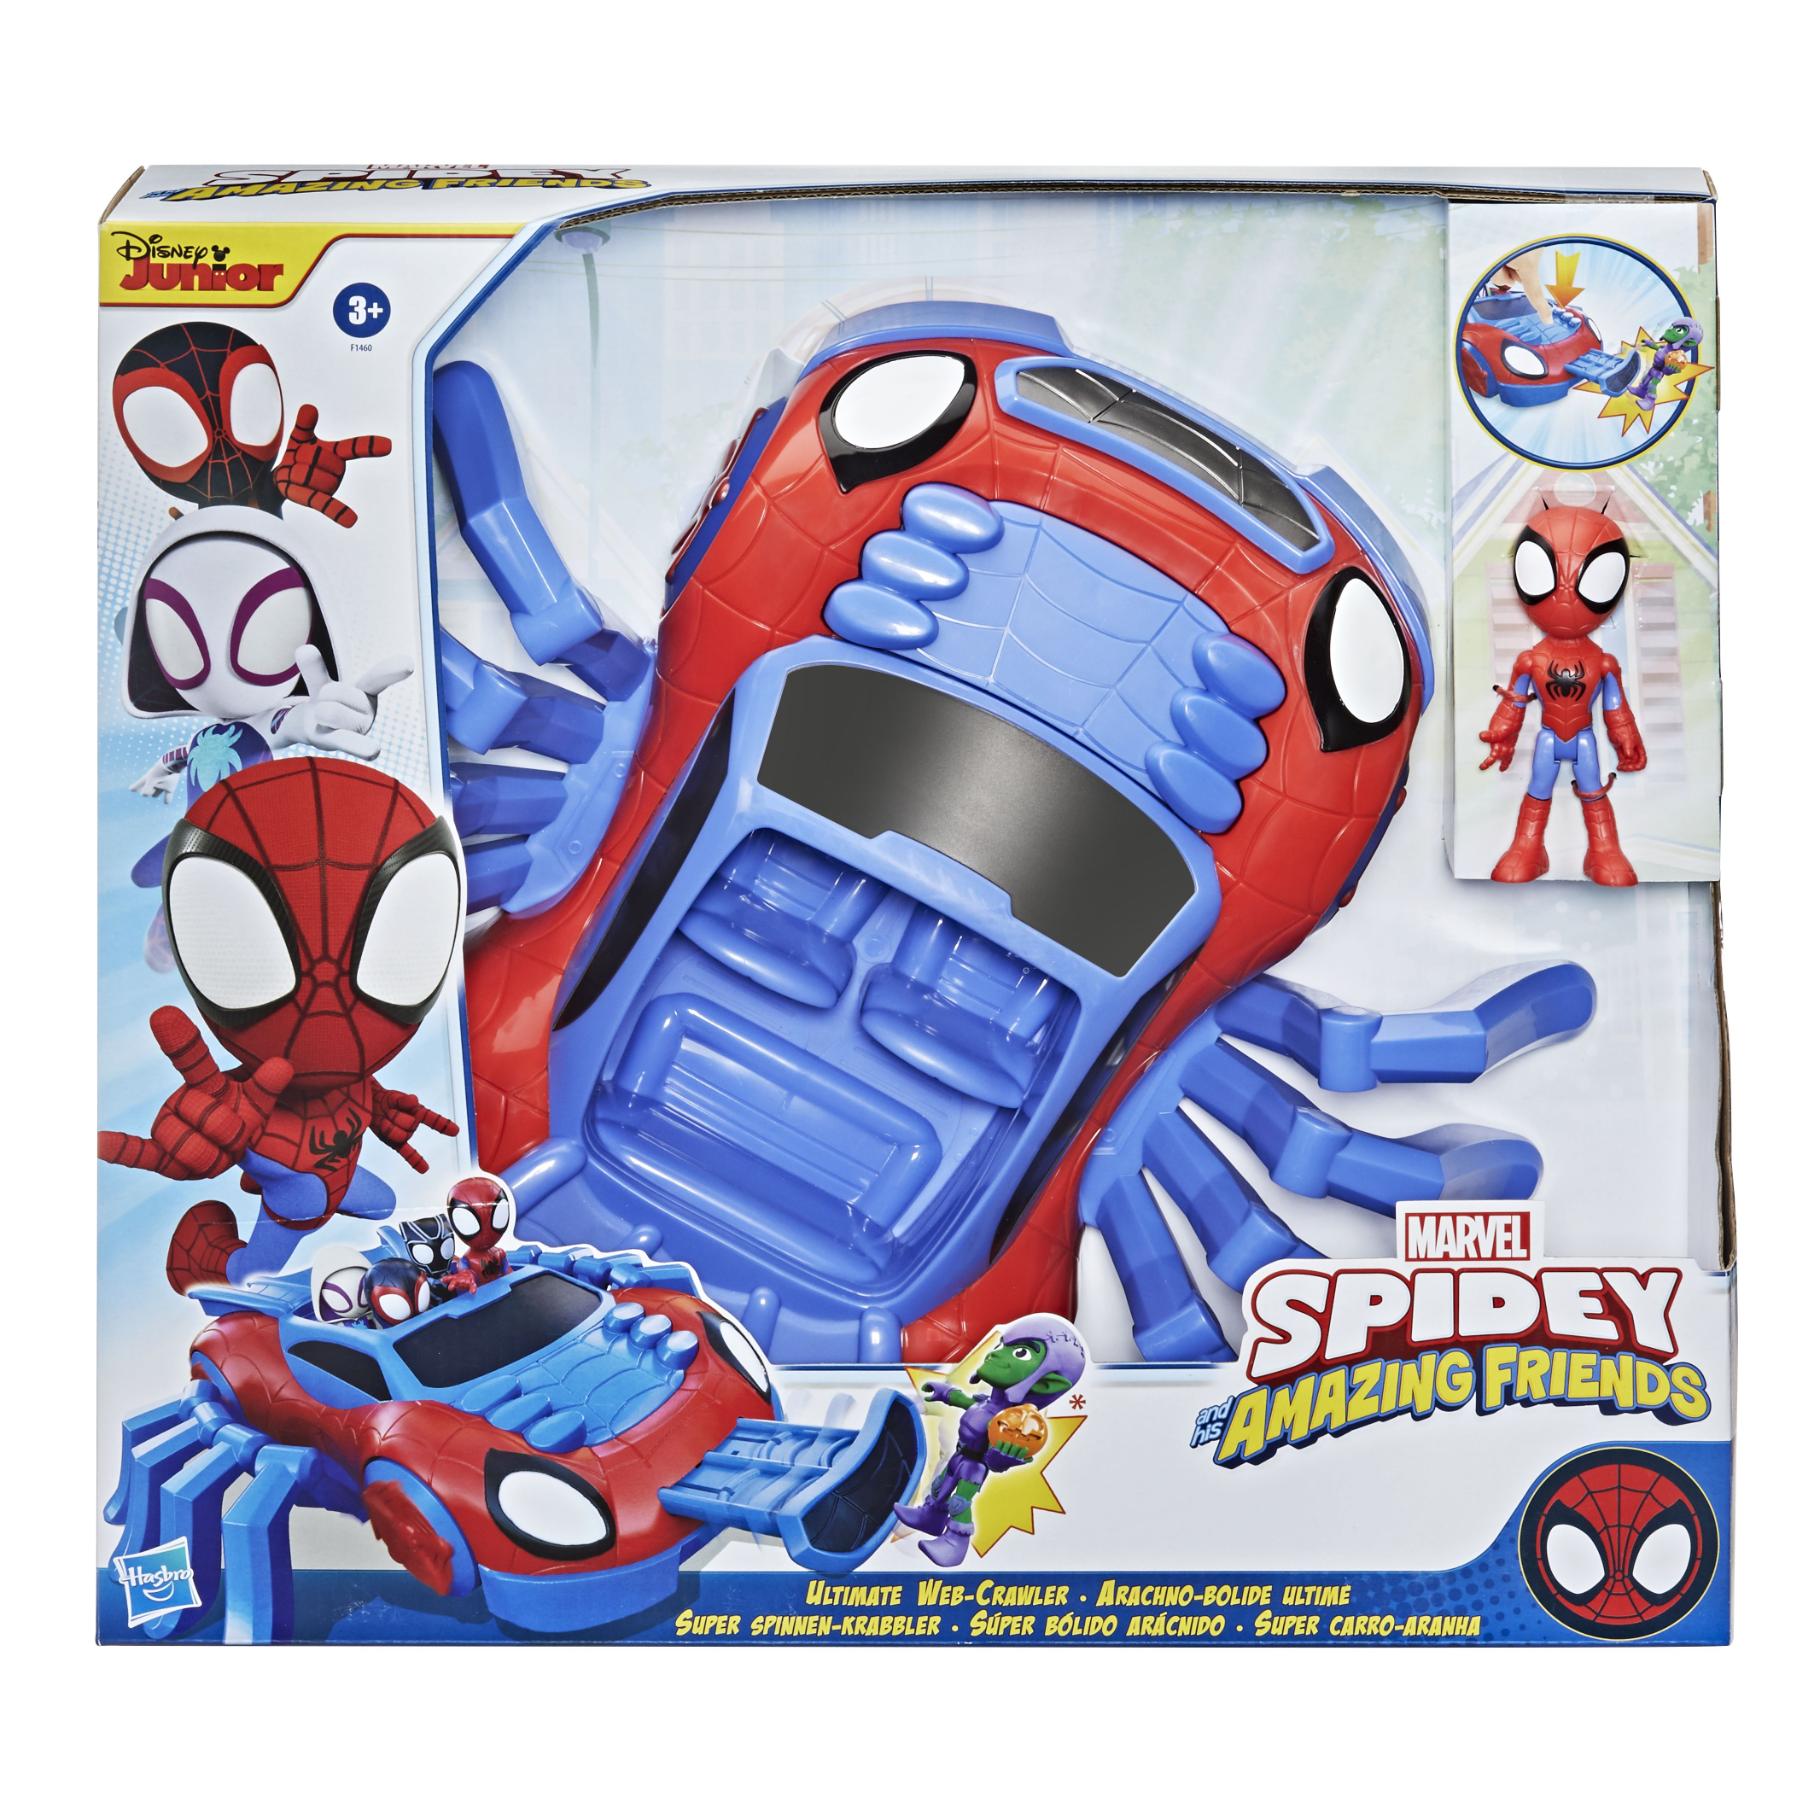 Top1Toys Spidey and friends ultimate web crawler